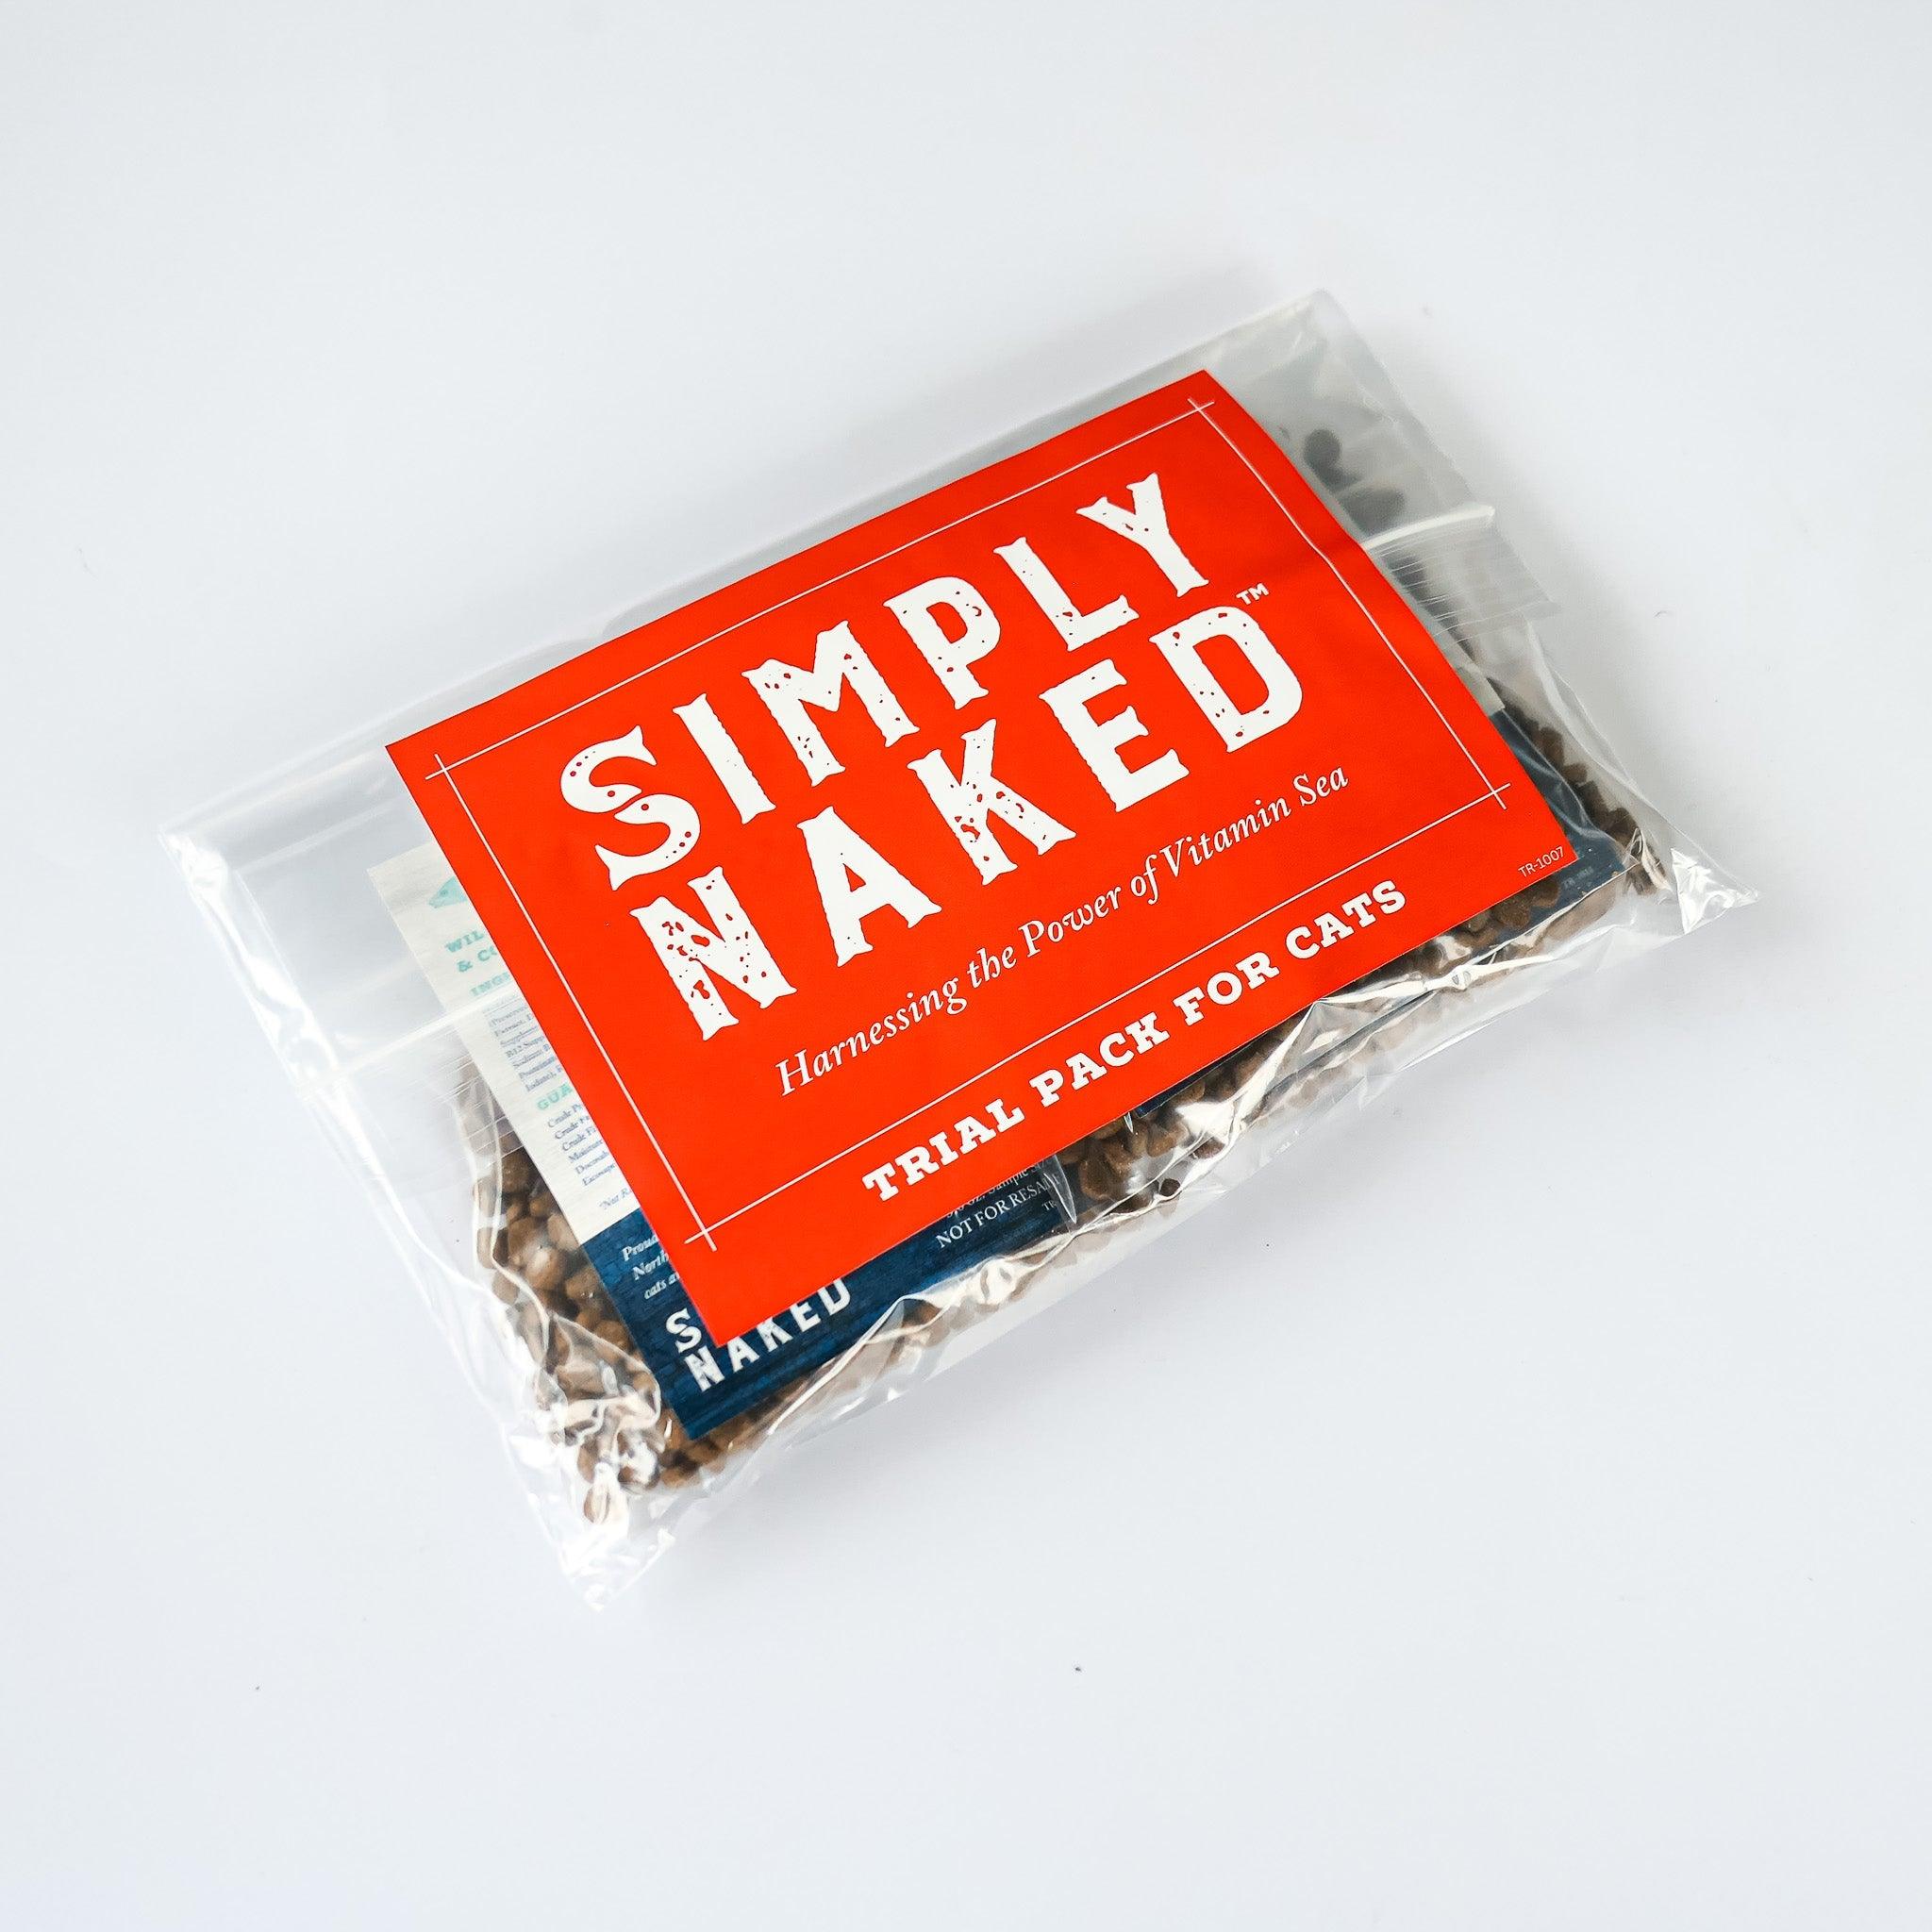 Trial Pack Sampler for Cats with FREE SHIPPING - Simply Naked Fish Based Dog Food & Cat Food